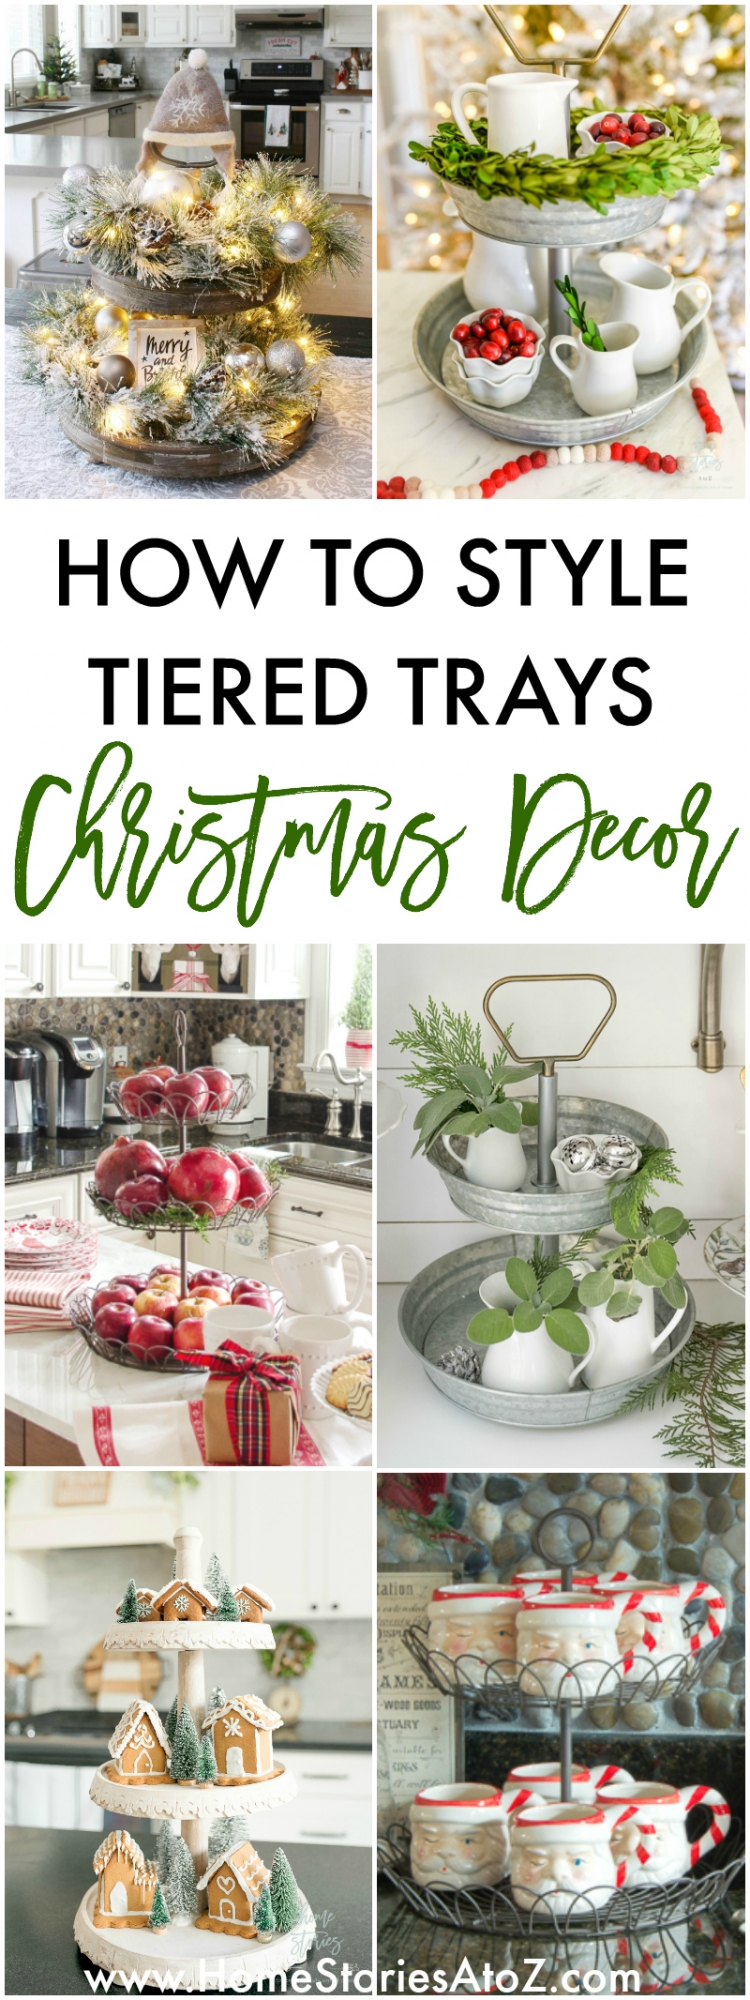 How to Style Tiered Trays for Christmas - Home Stories A to Z